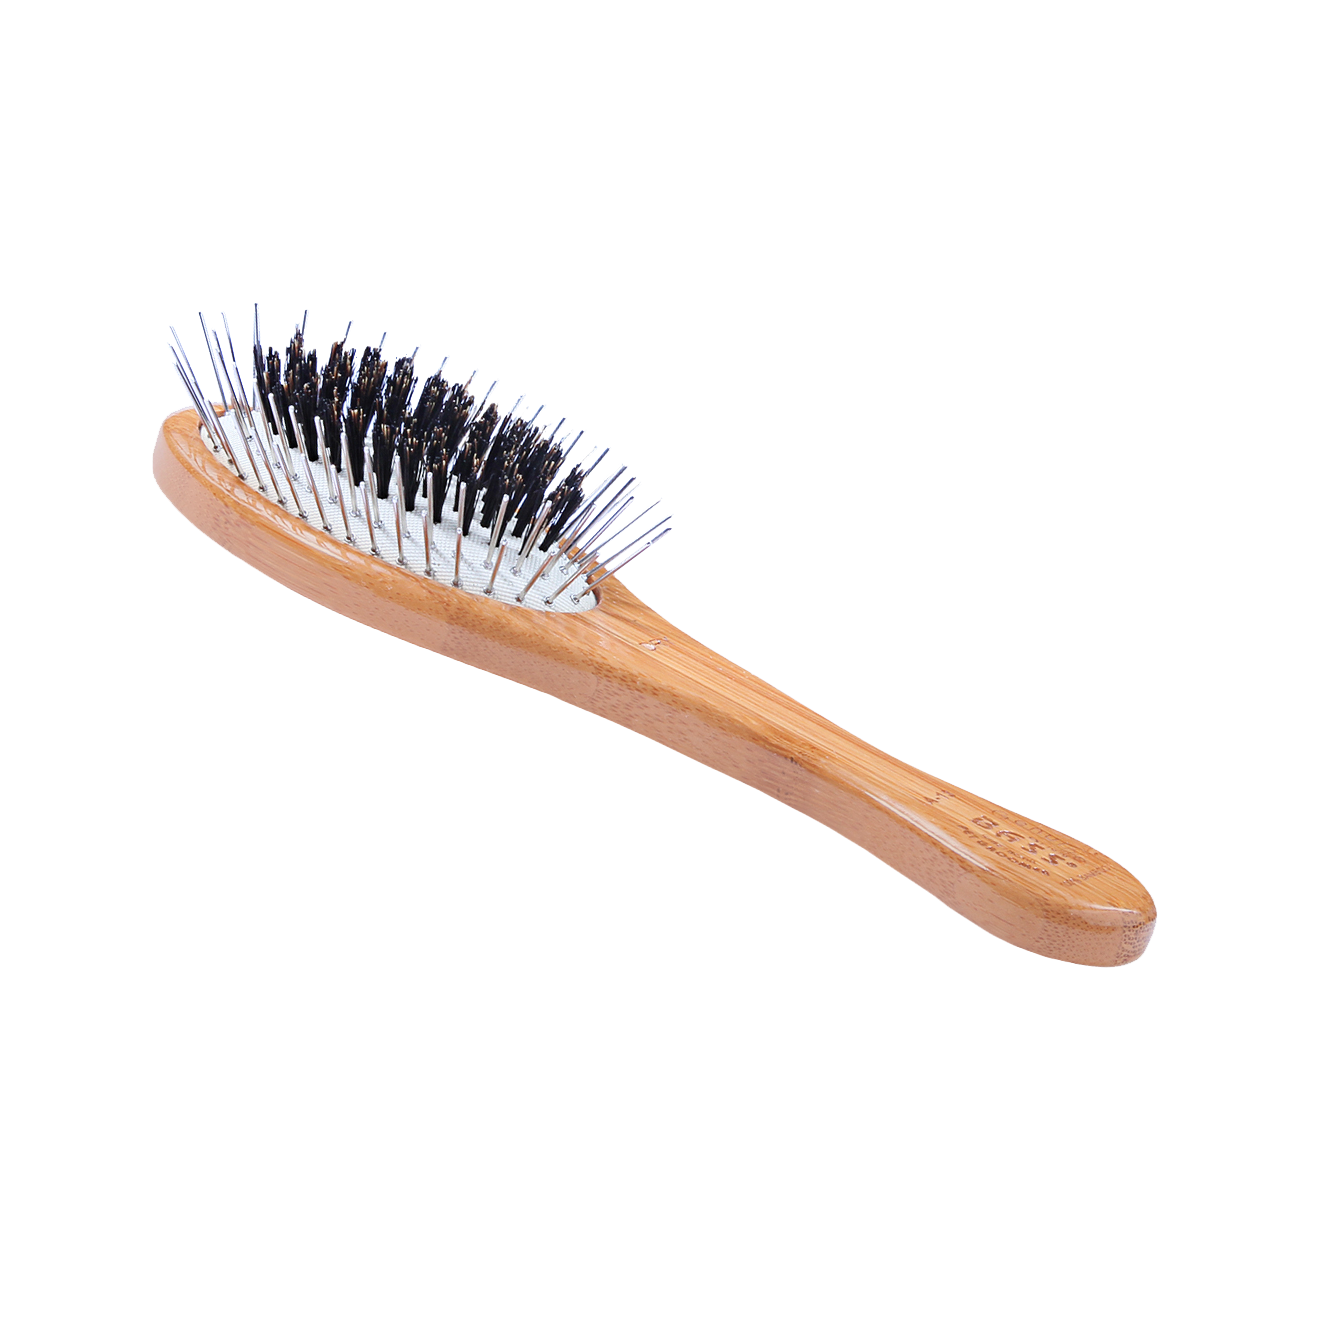 Bass Brushes - Wire/Boar Pet Groomer - Bamboo Wood Handle